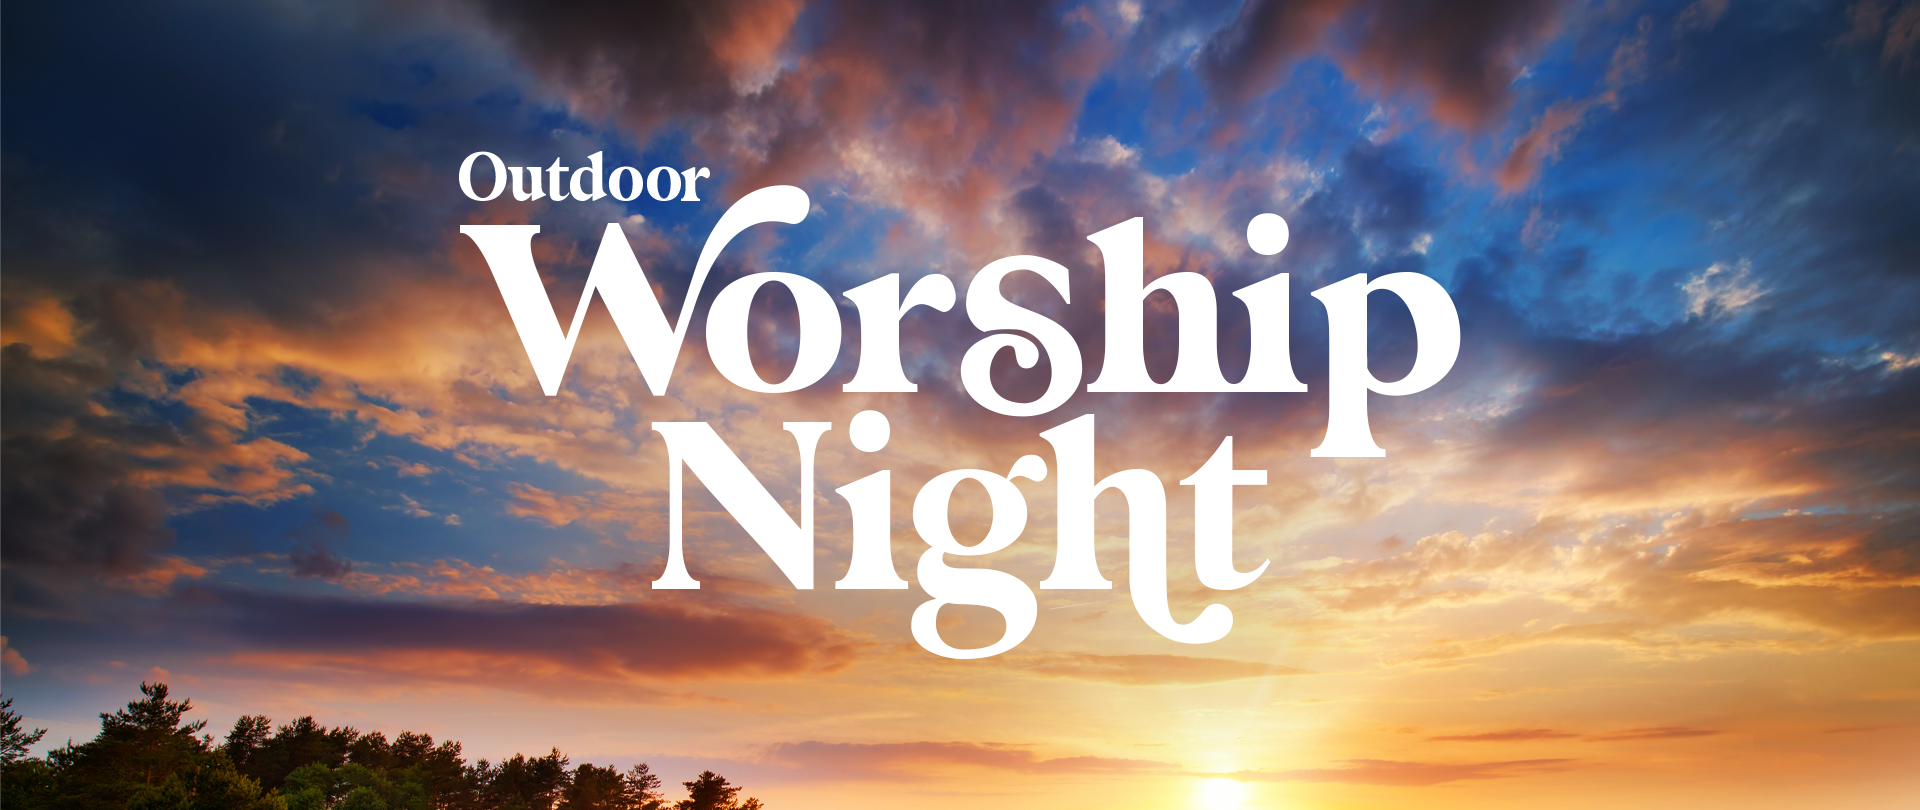 Outdoor Worship Night
Sunday, May 19, at 7:00 PM
On the Hwy 51 Sports Fields
